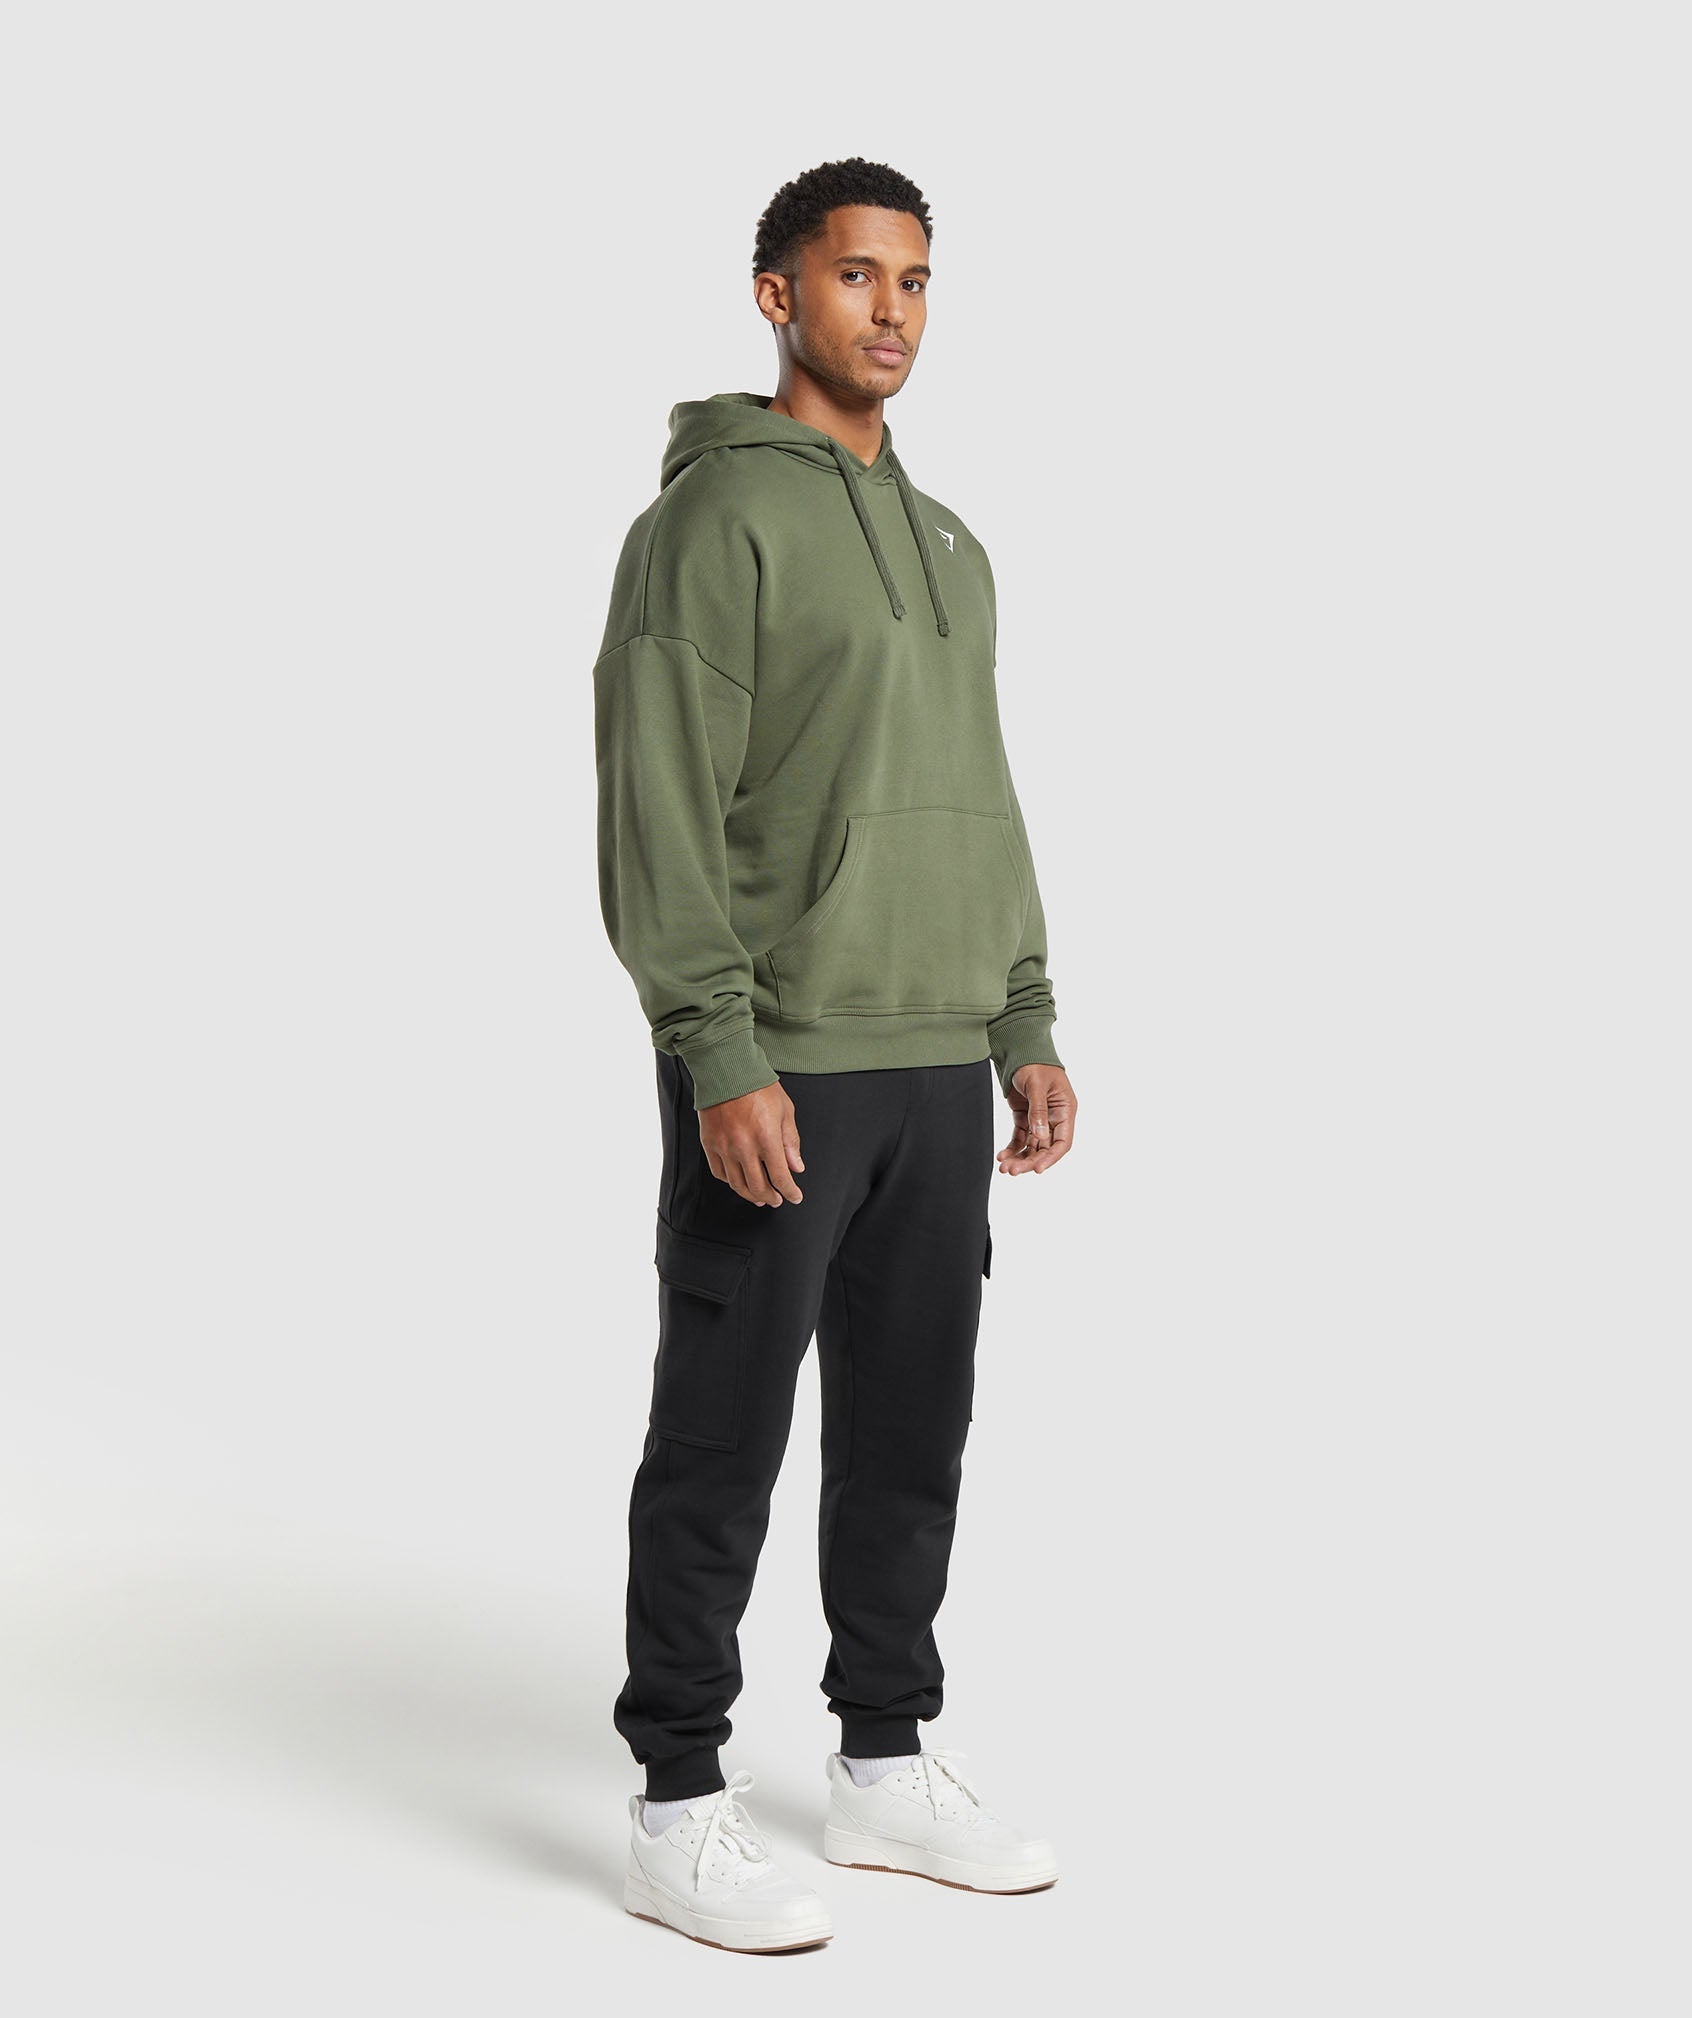 Crest Oversized Hoodie in Core Olive - view 4